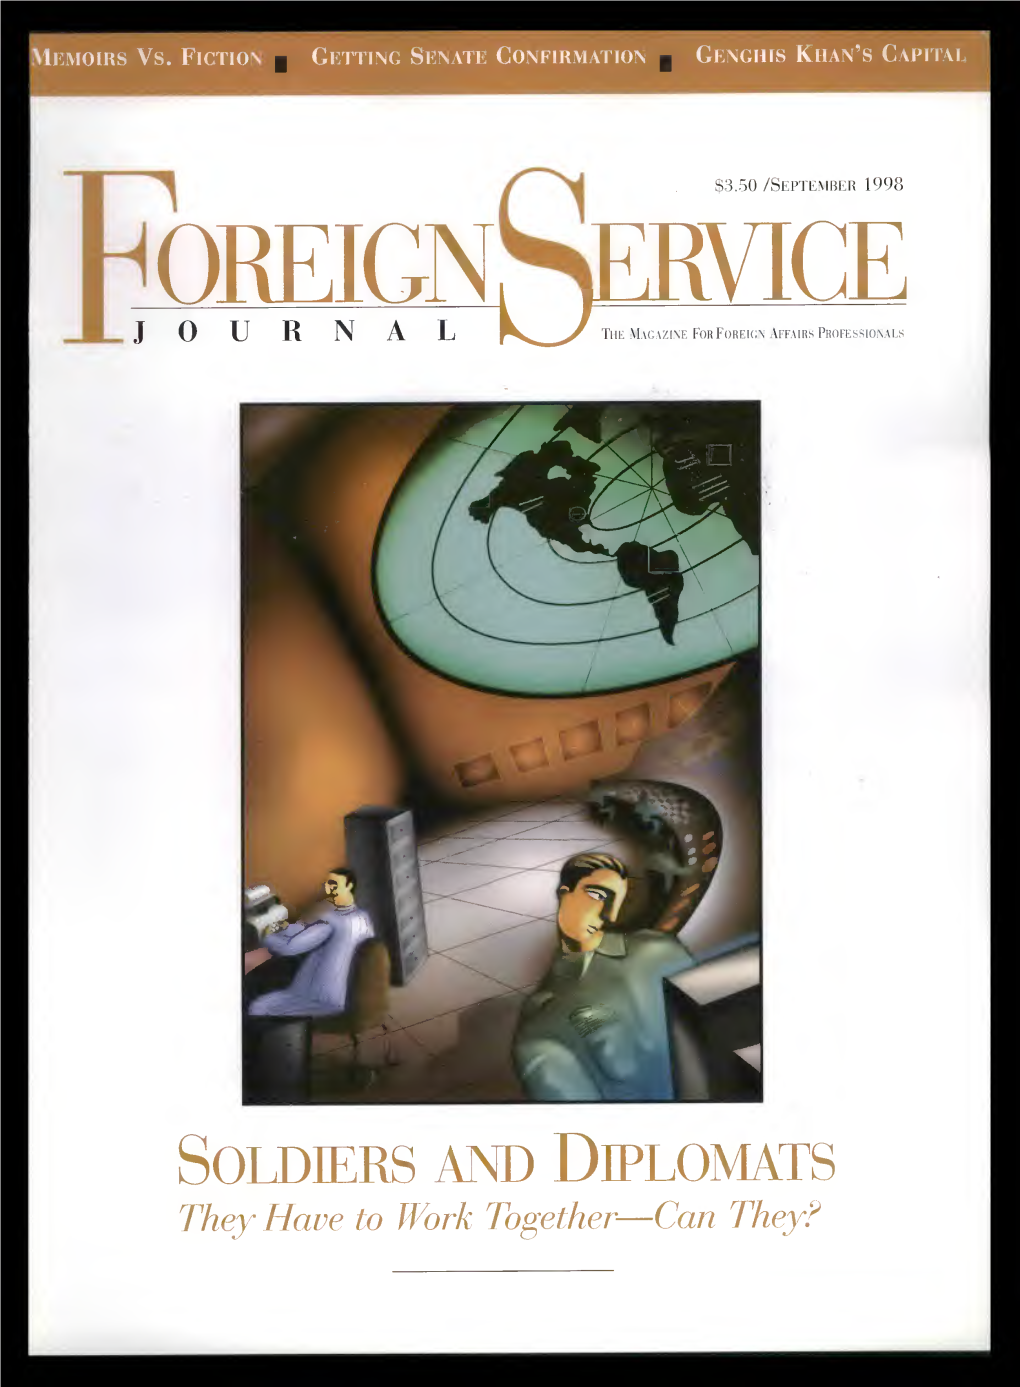 The Foreign Service Journal, September 1998